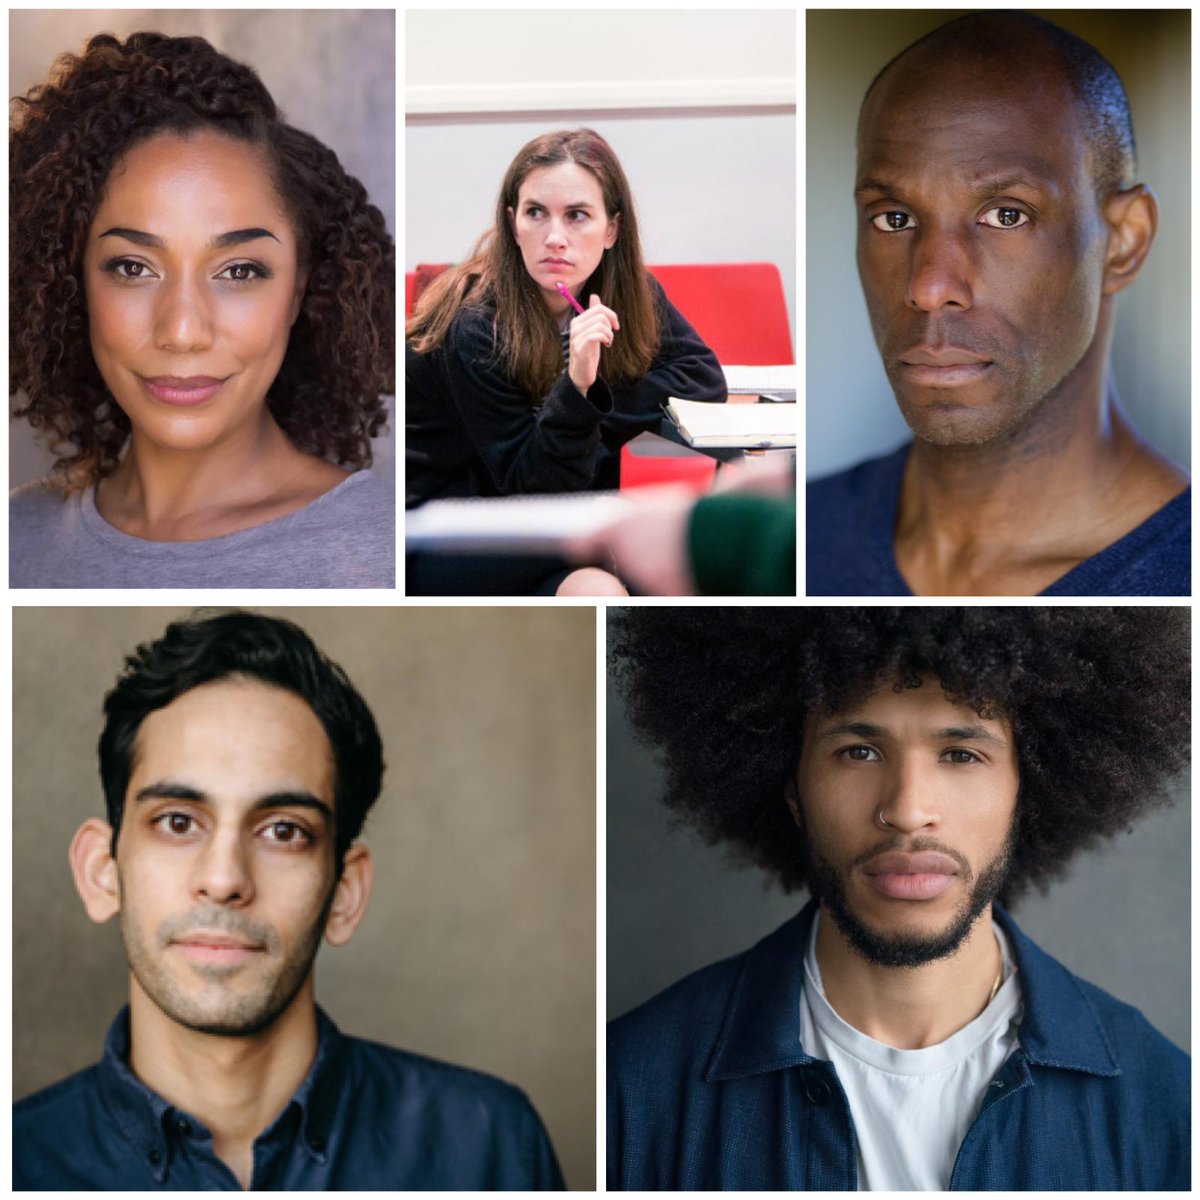 ⭐️Presenting our brilliant artists for #HugoAndHarley by Tanya-Loretta Dee⭐️ 💫 Directed by @nadpap26 💫 Starring #SidSagar @kwamiodoom #TanyaLorettaDee #ValentineHanson 💫 Sound by @nicolatchang 💫 Inspired by visits to #BarlbyPrimarySchool #NorthKensington #OurVoices2